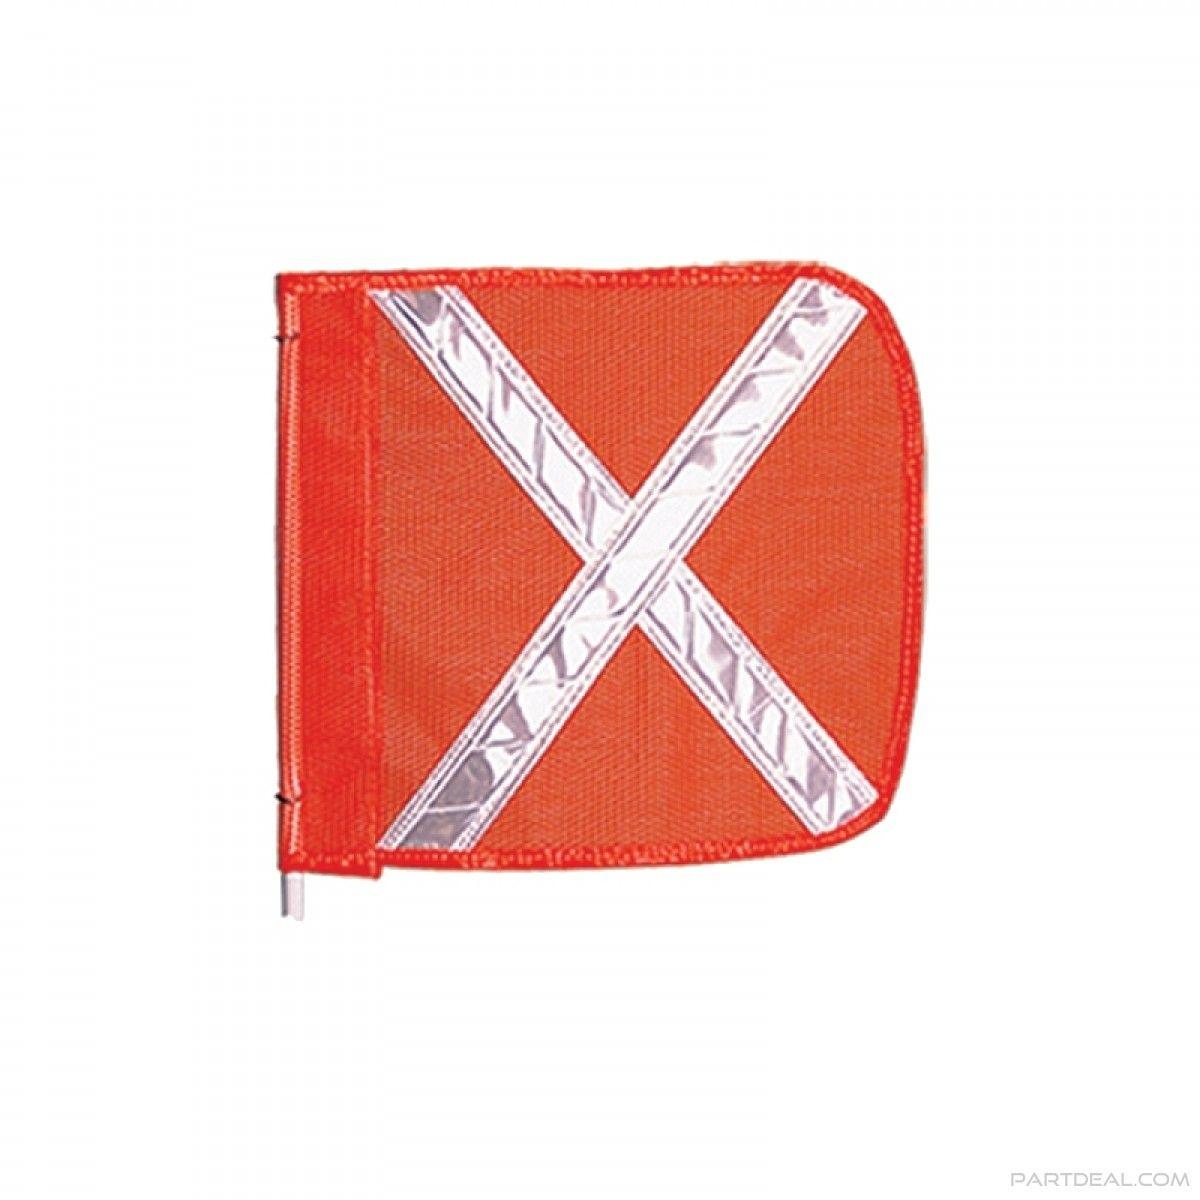 Red Rectangle with White X Logo - Checkers-Checkers Day Bright 16 in. x 16 in. Red Safety Replacement ...